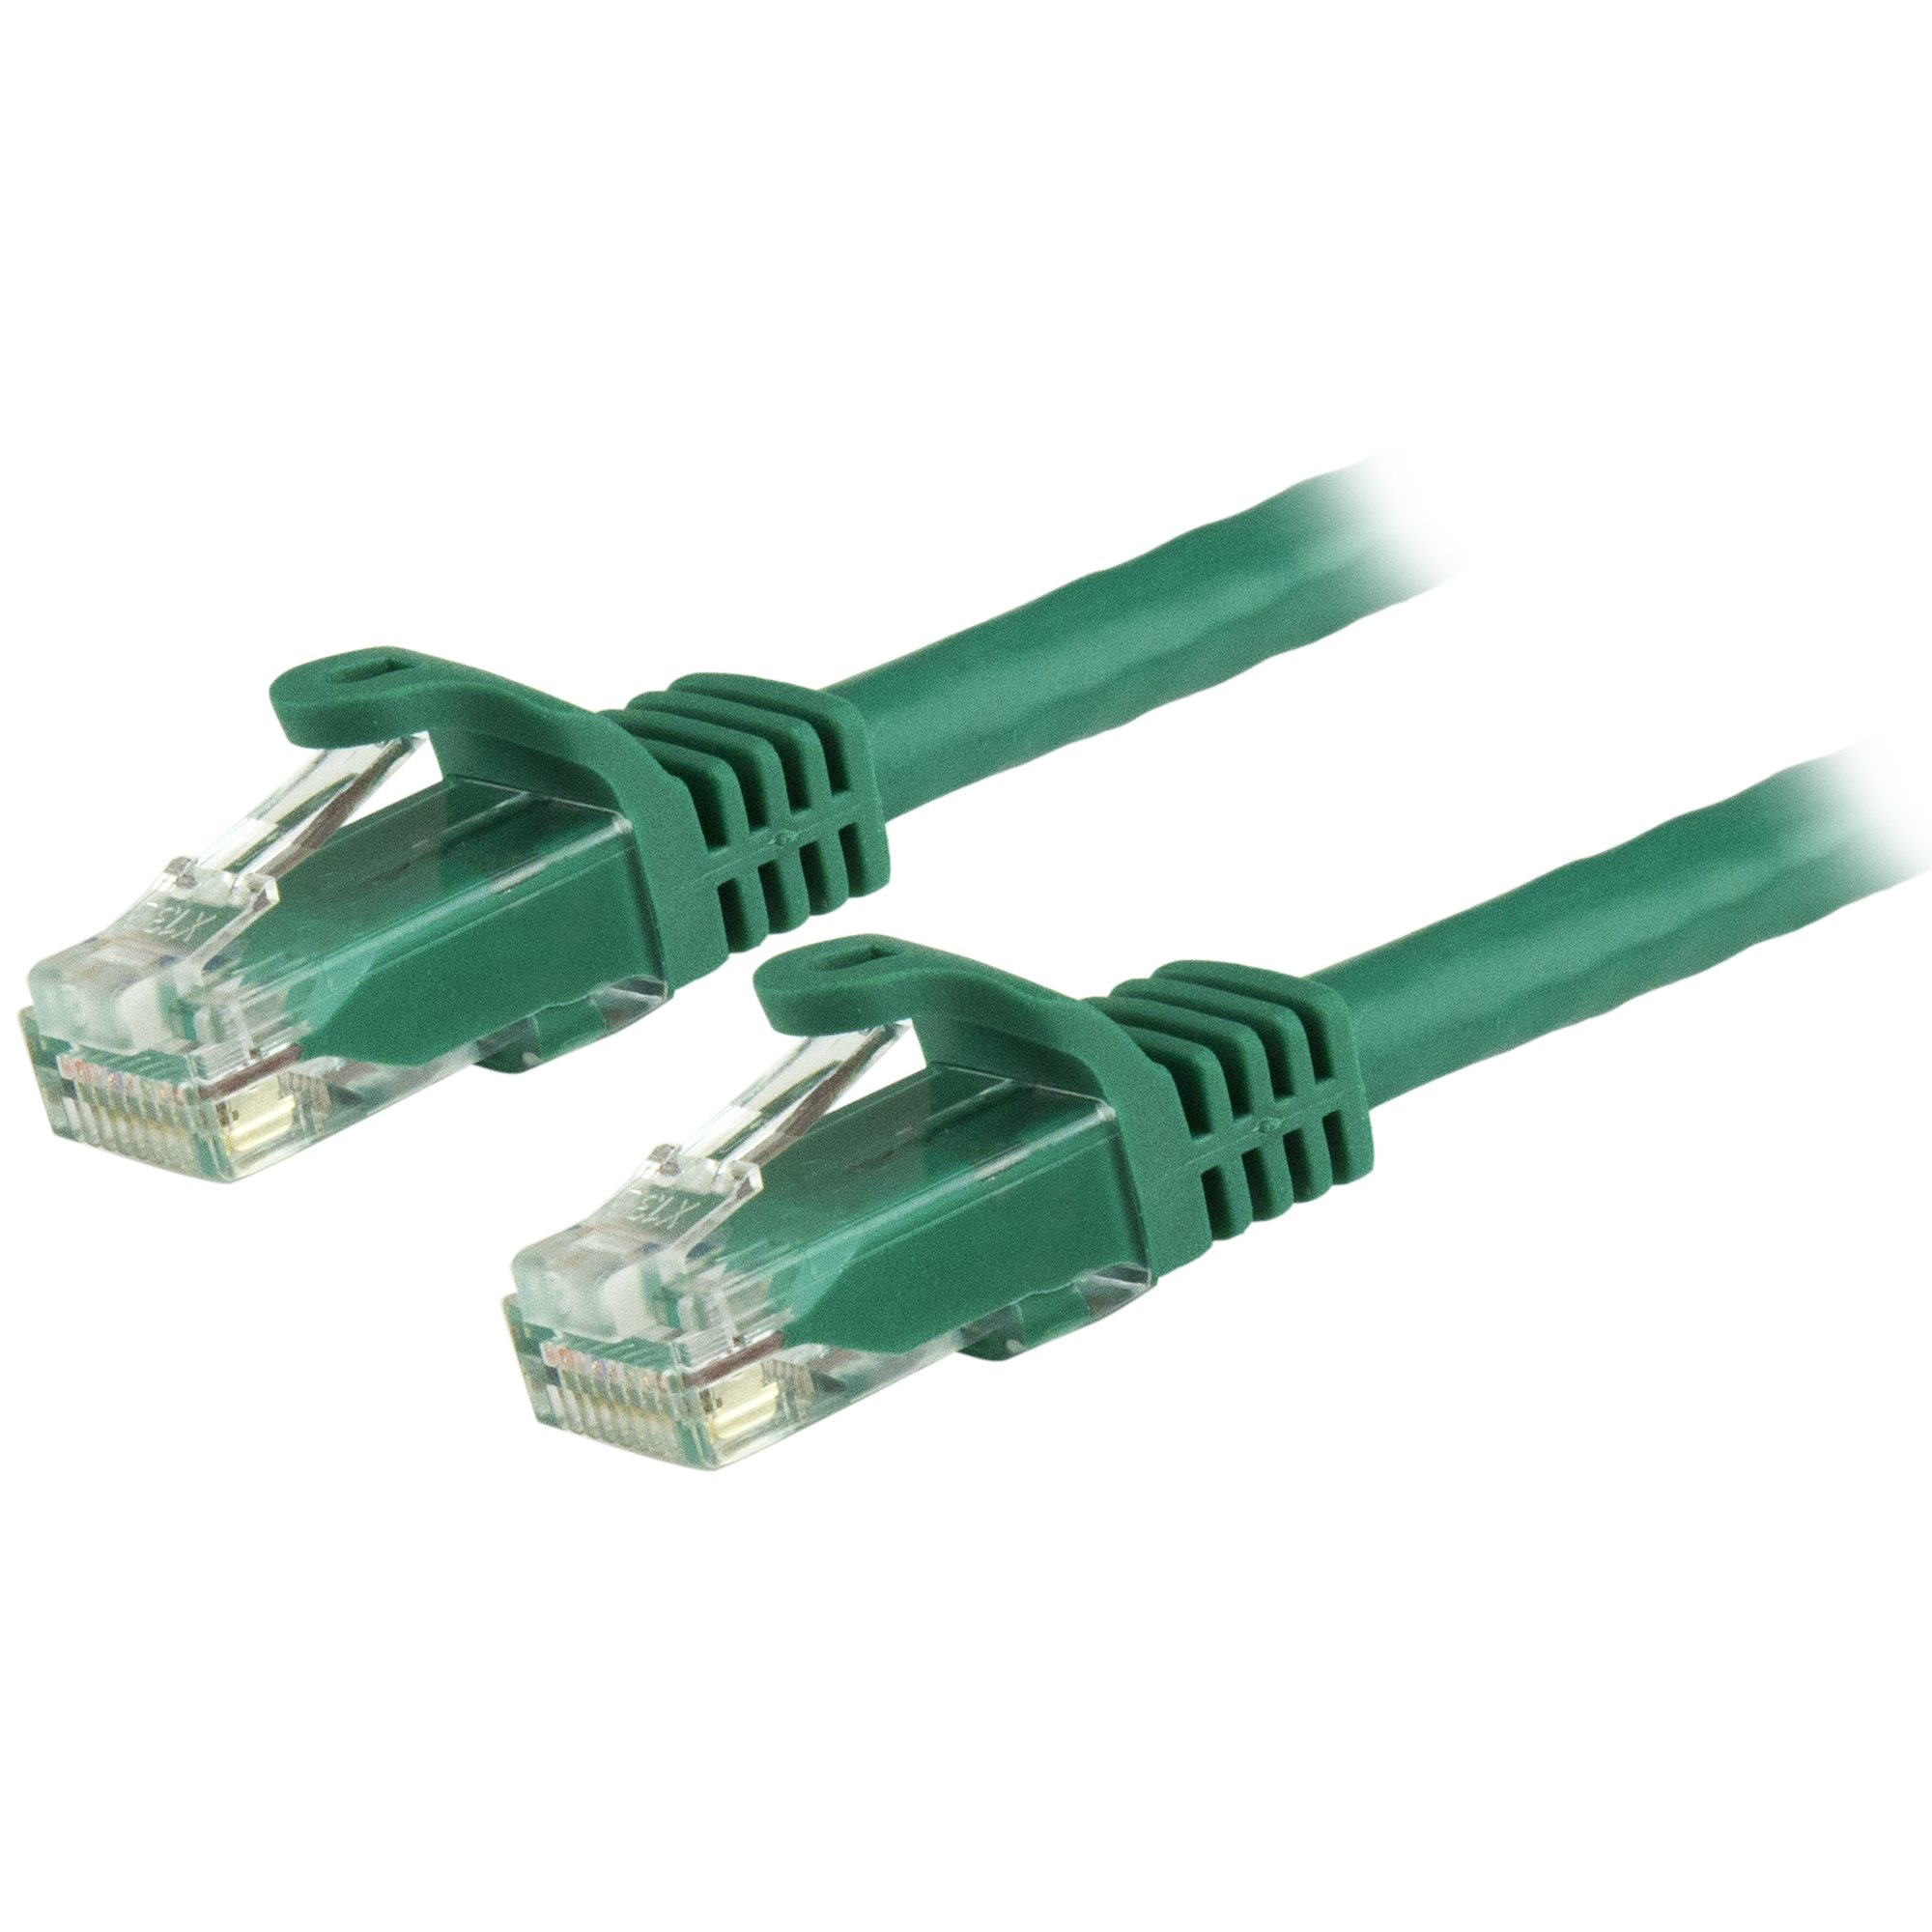 5m Green Snagless UTP Cat6 Patch Cable afbeelding